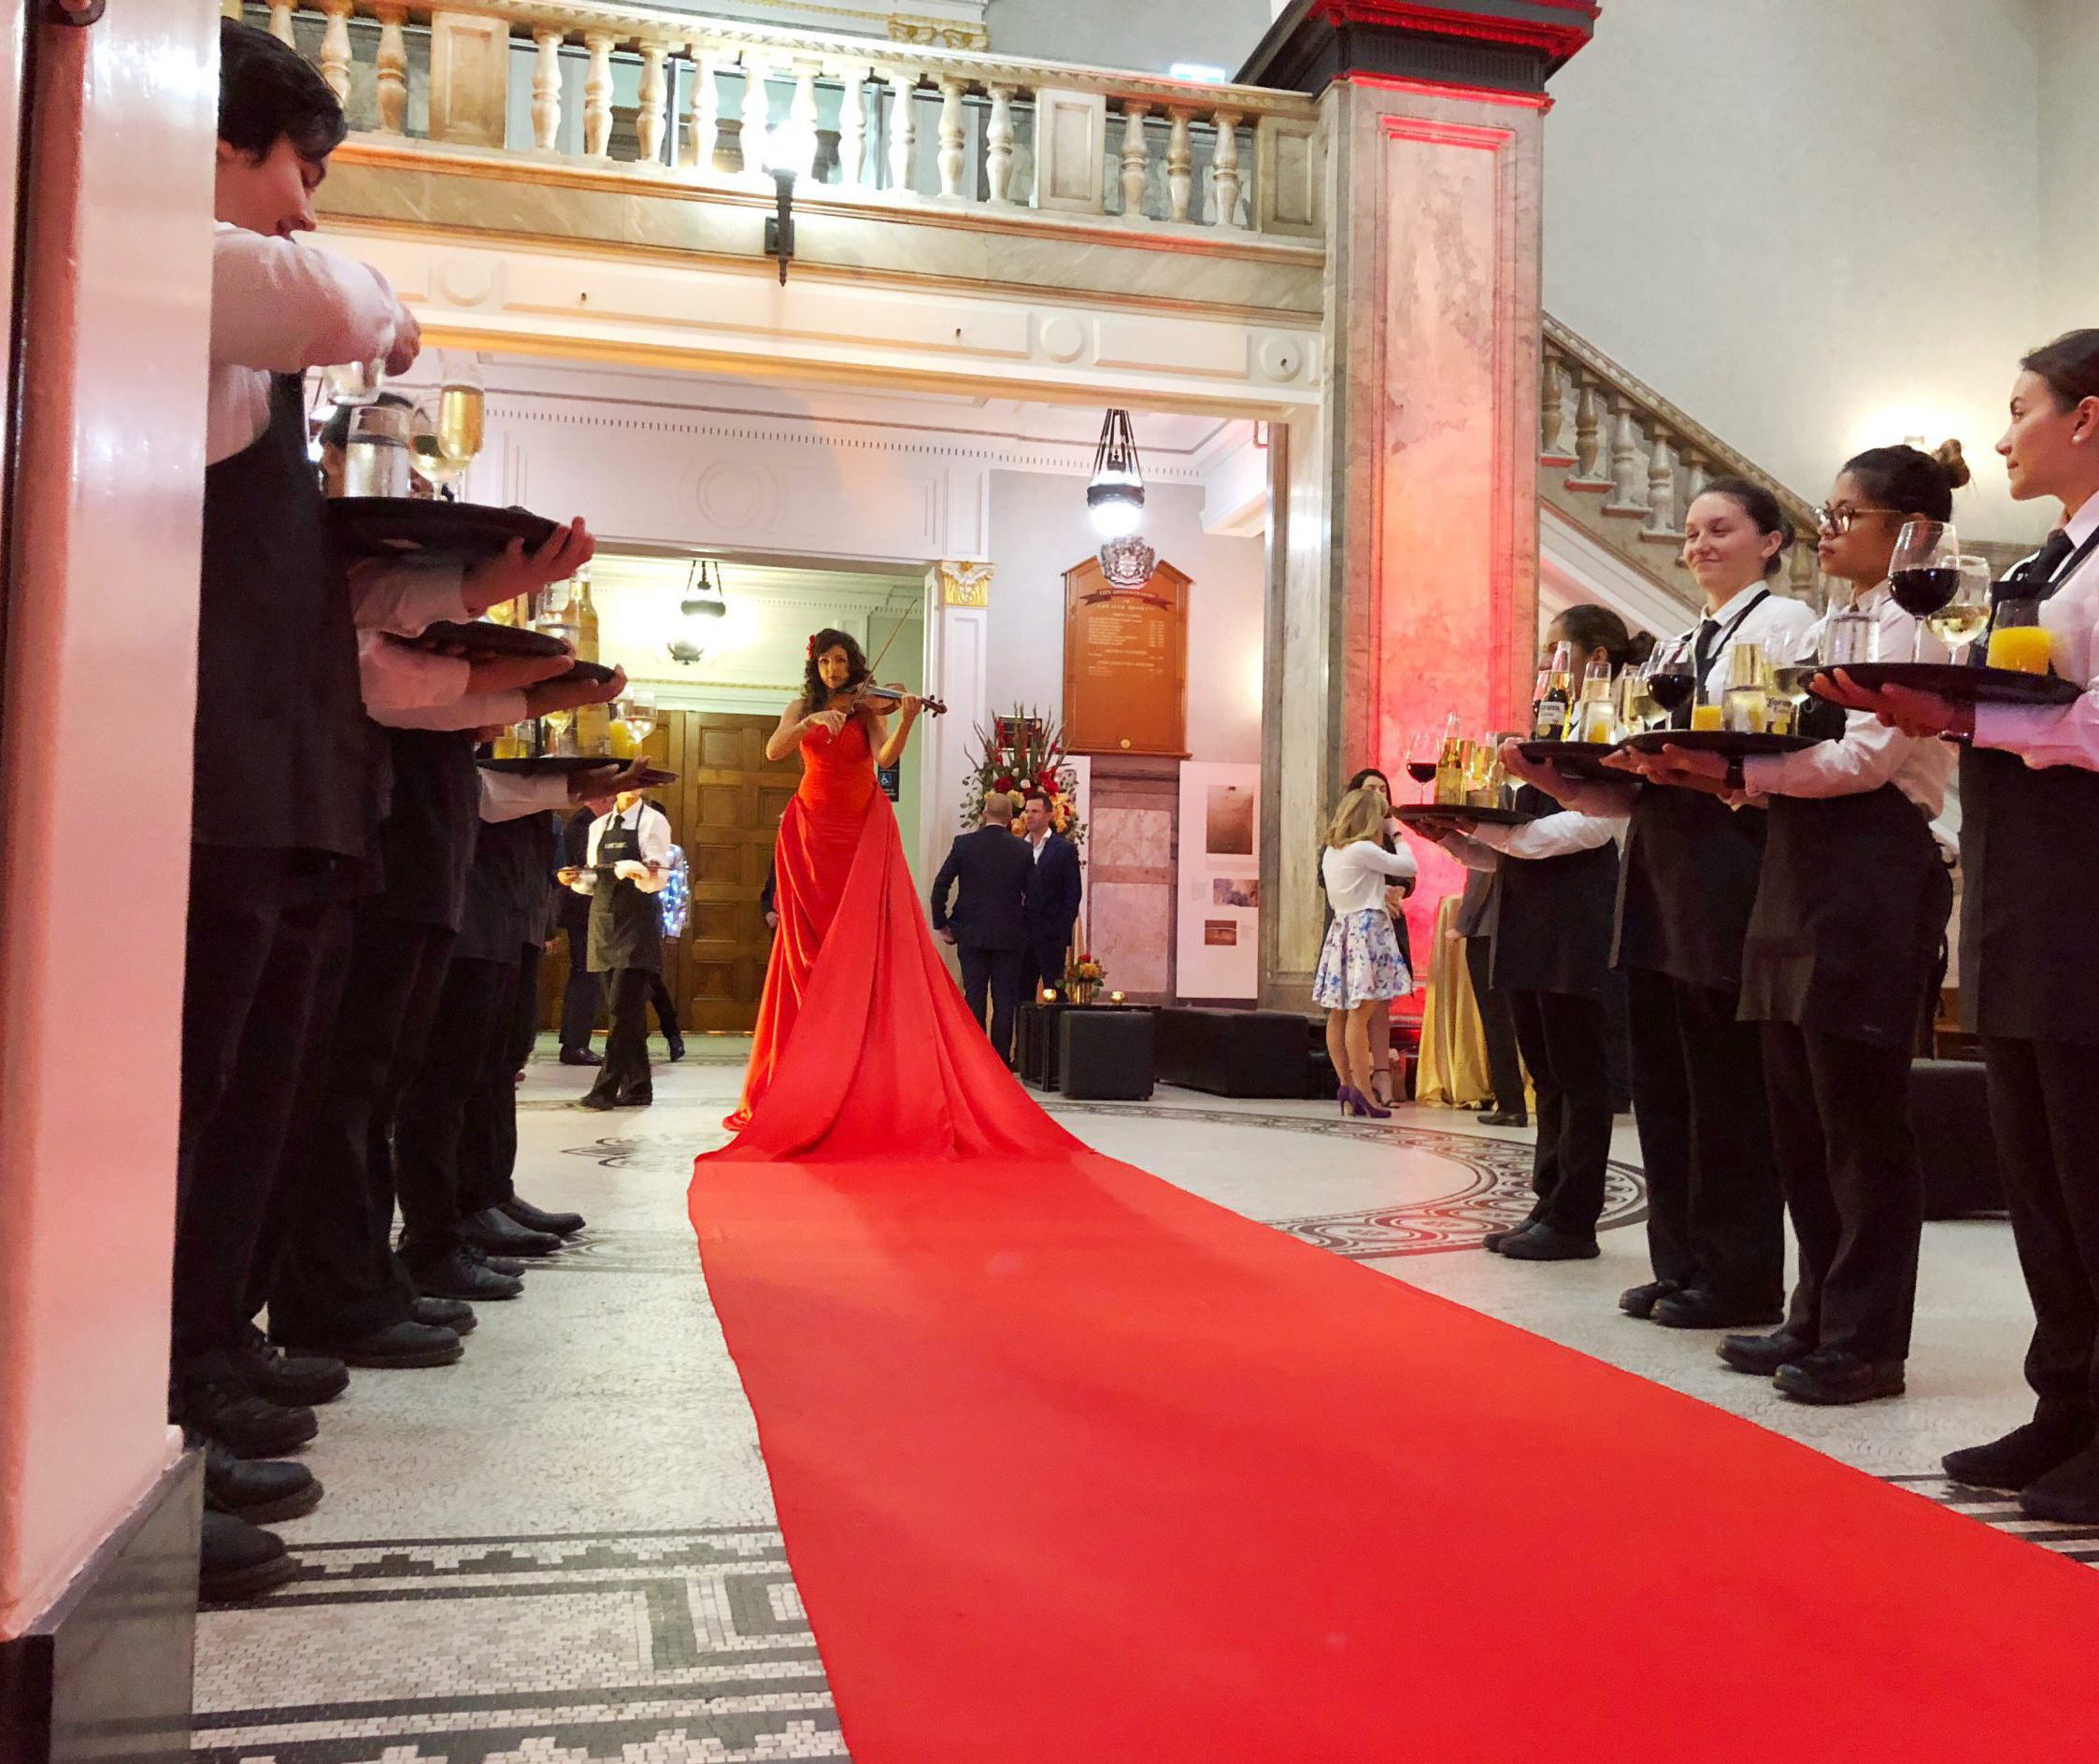 Lady wearing a very long red dress acting as a red carpet